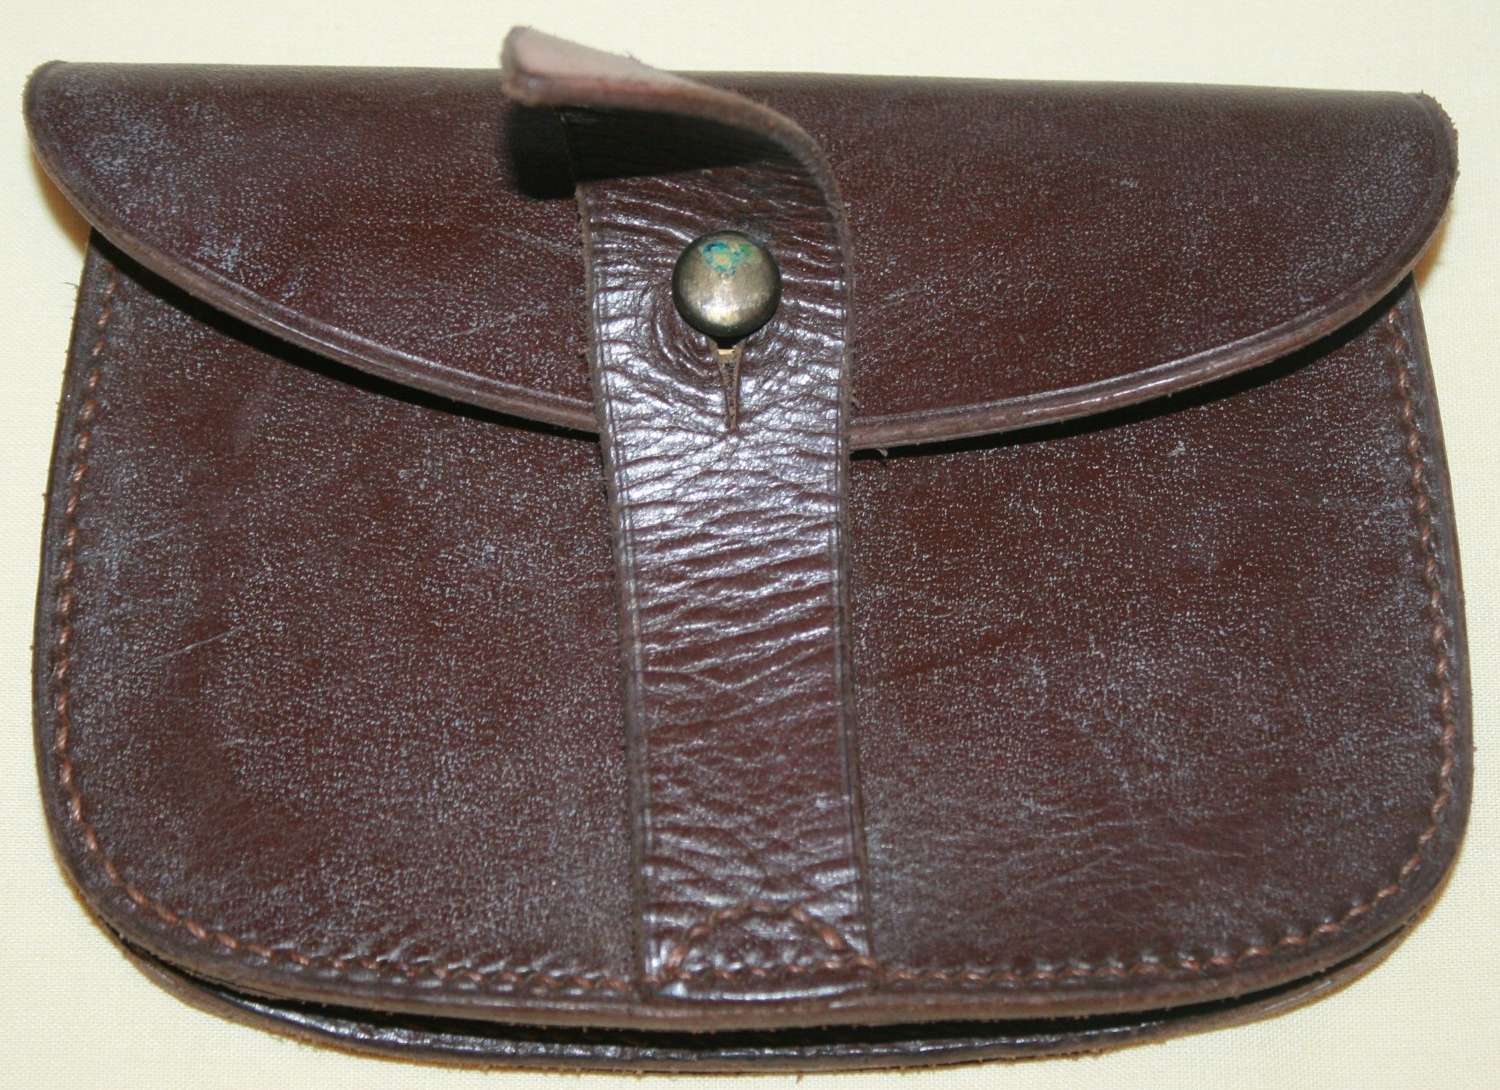 A GOOD EARLY EXAMPLE OFT HE SAM BROWN PISTOL AMMO POUCH